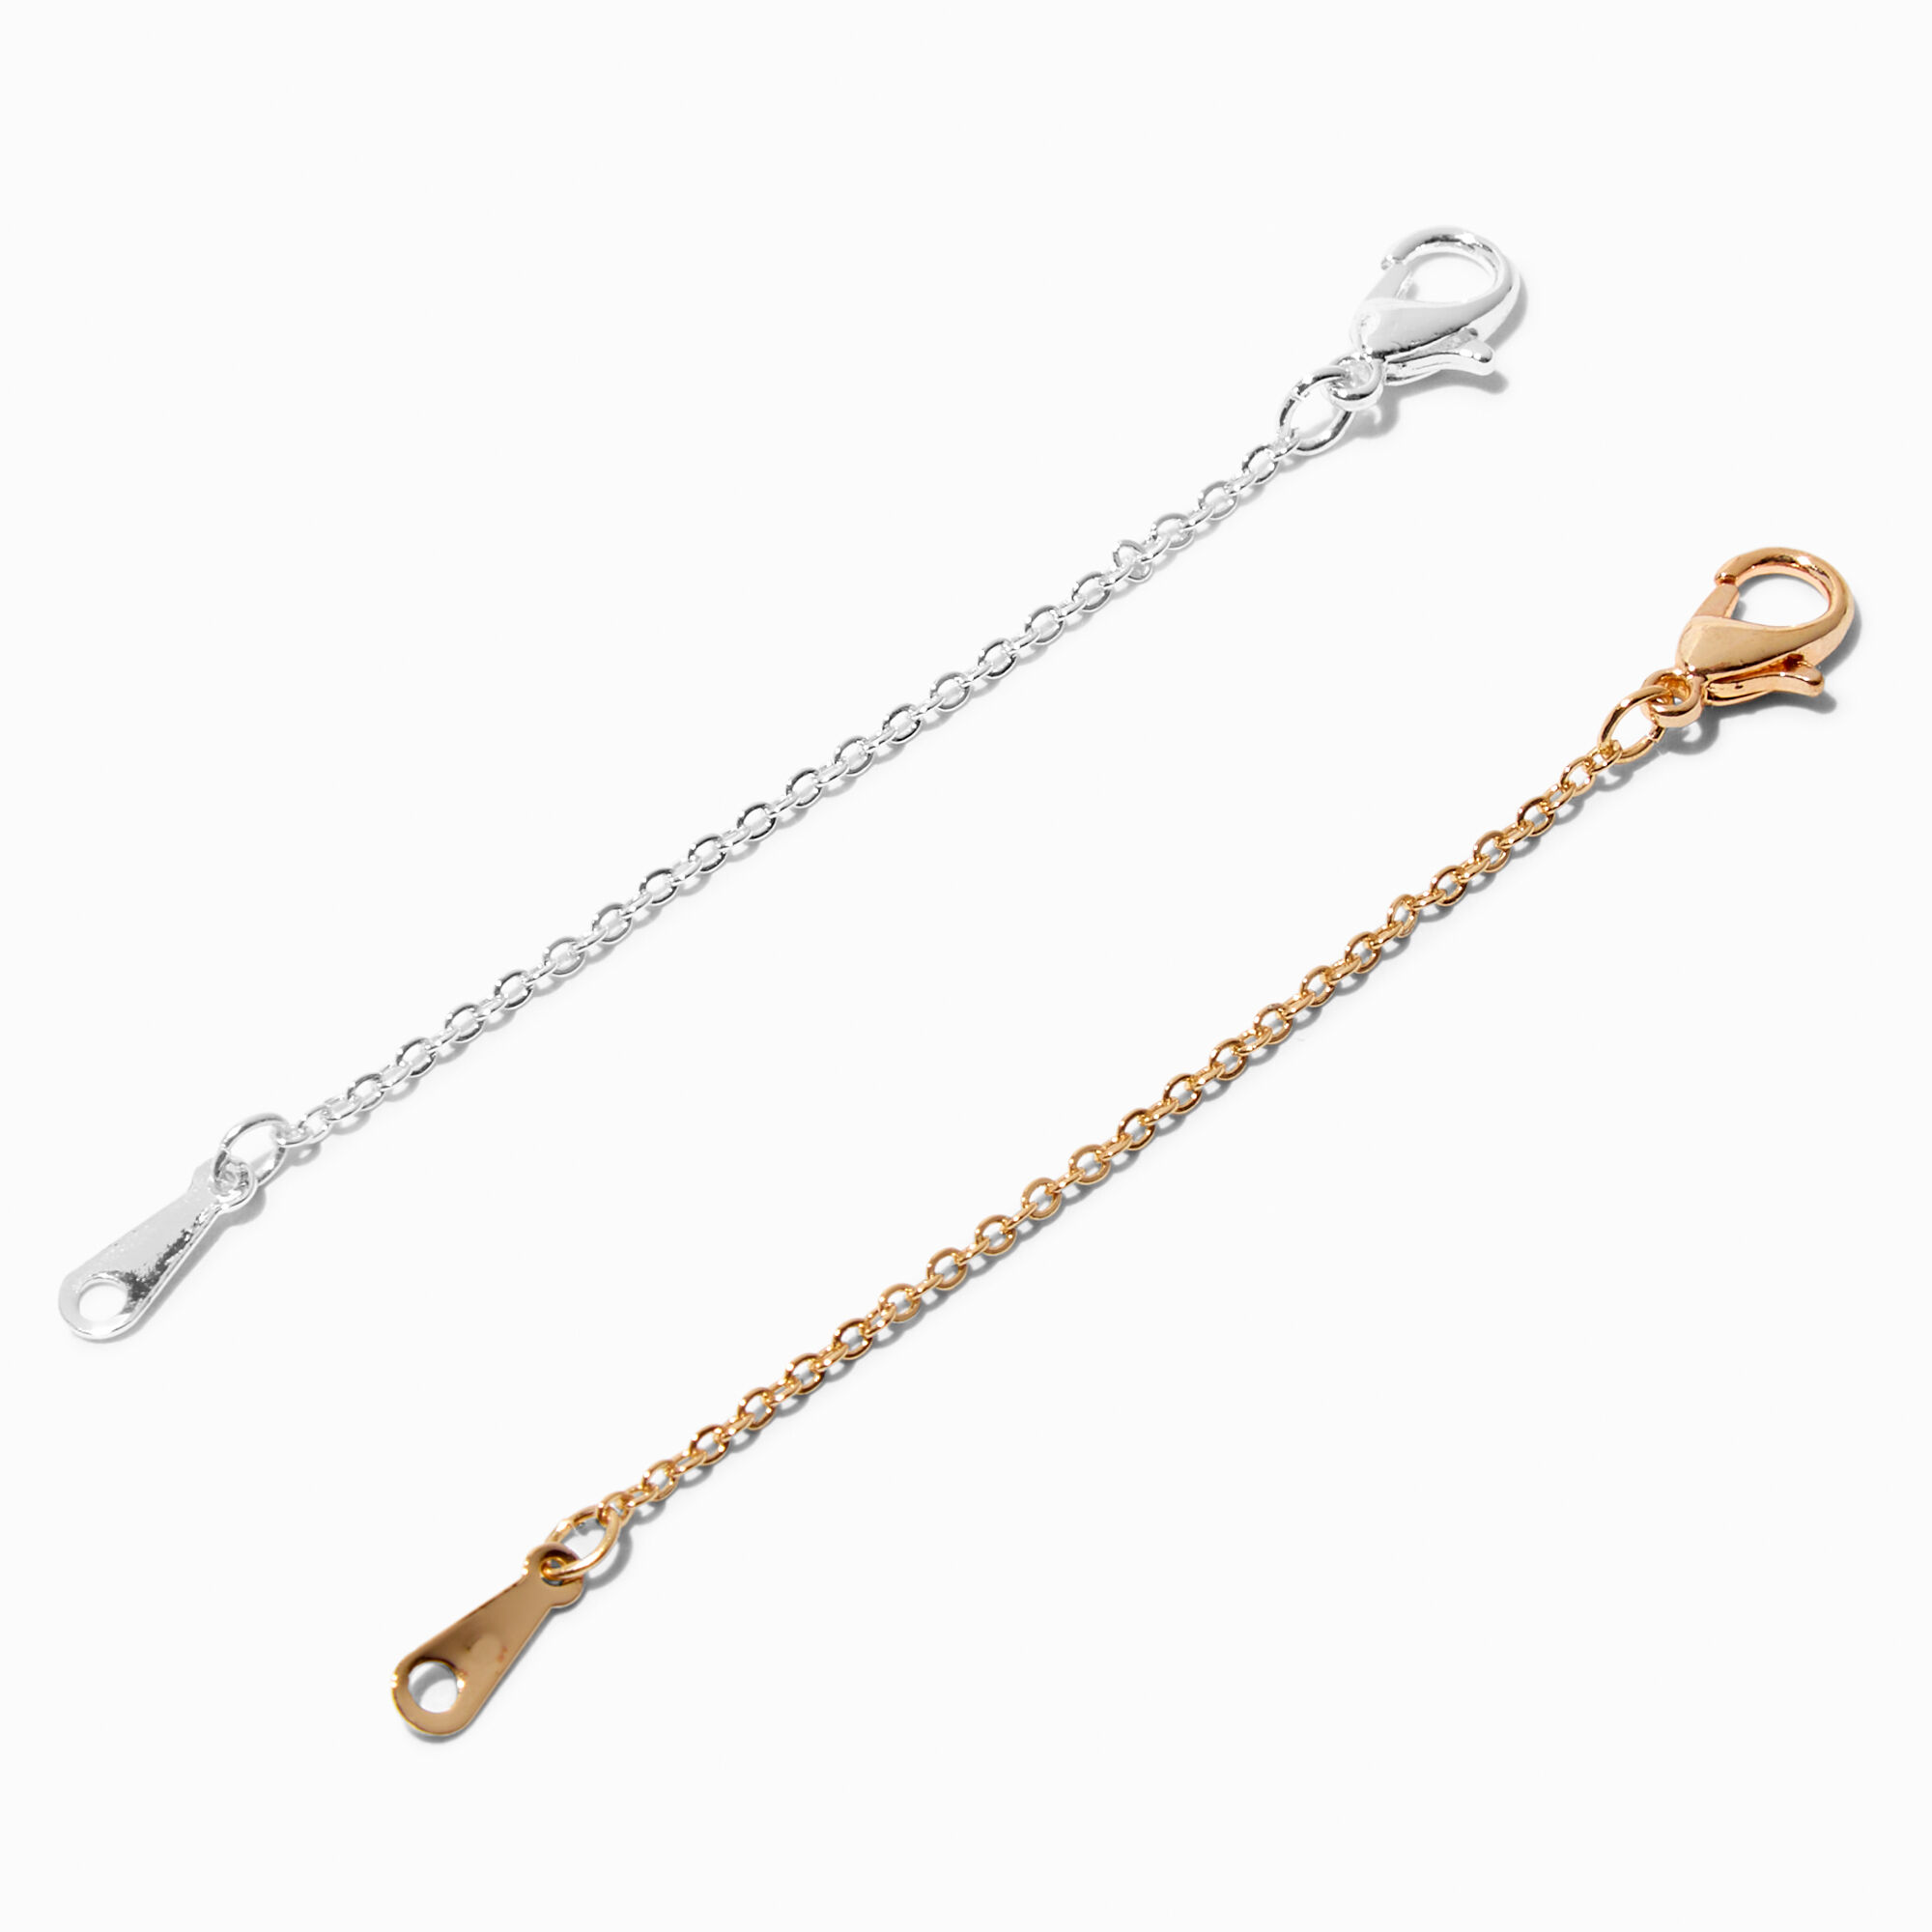 View Claires Mixed Metal Chain Extenders 2 Pack Bracelet Gold information